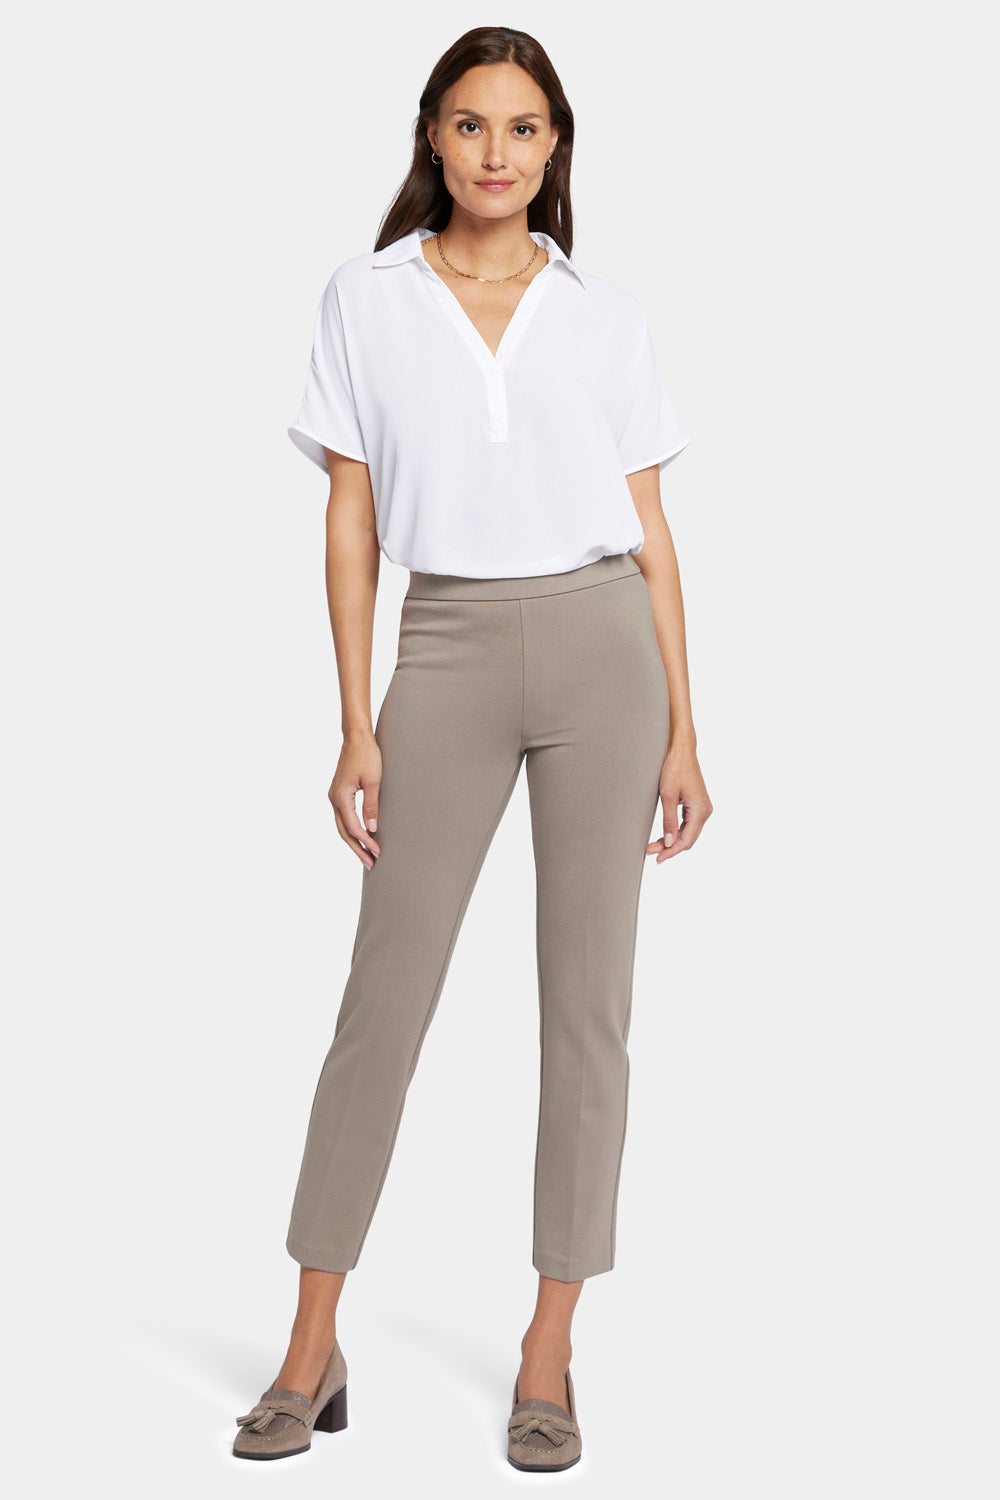 Pull-On Straight Ankle Trouser Pants Sculpt-Her™ Collection - Saddlewood  Tan | NYDJ